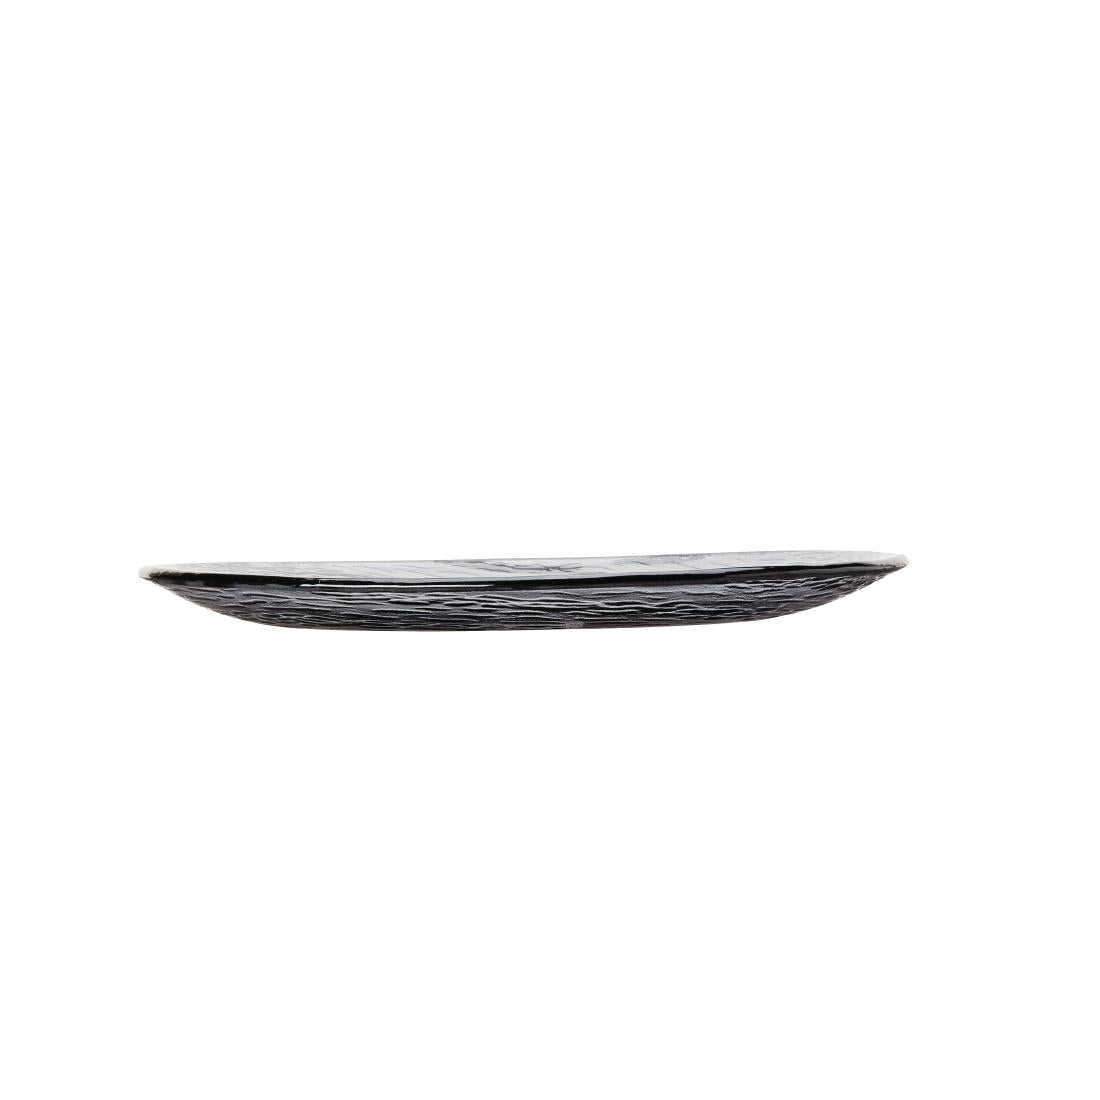 VV721 Steelite Scape Glass Platters 300mm Smoked (Pack of 6)